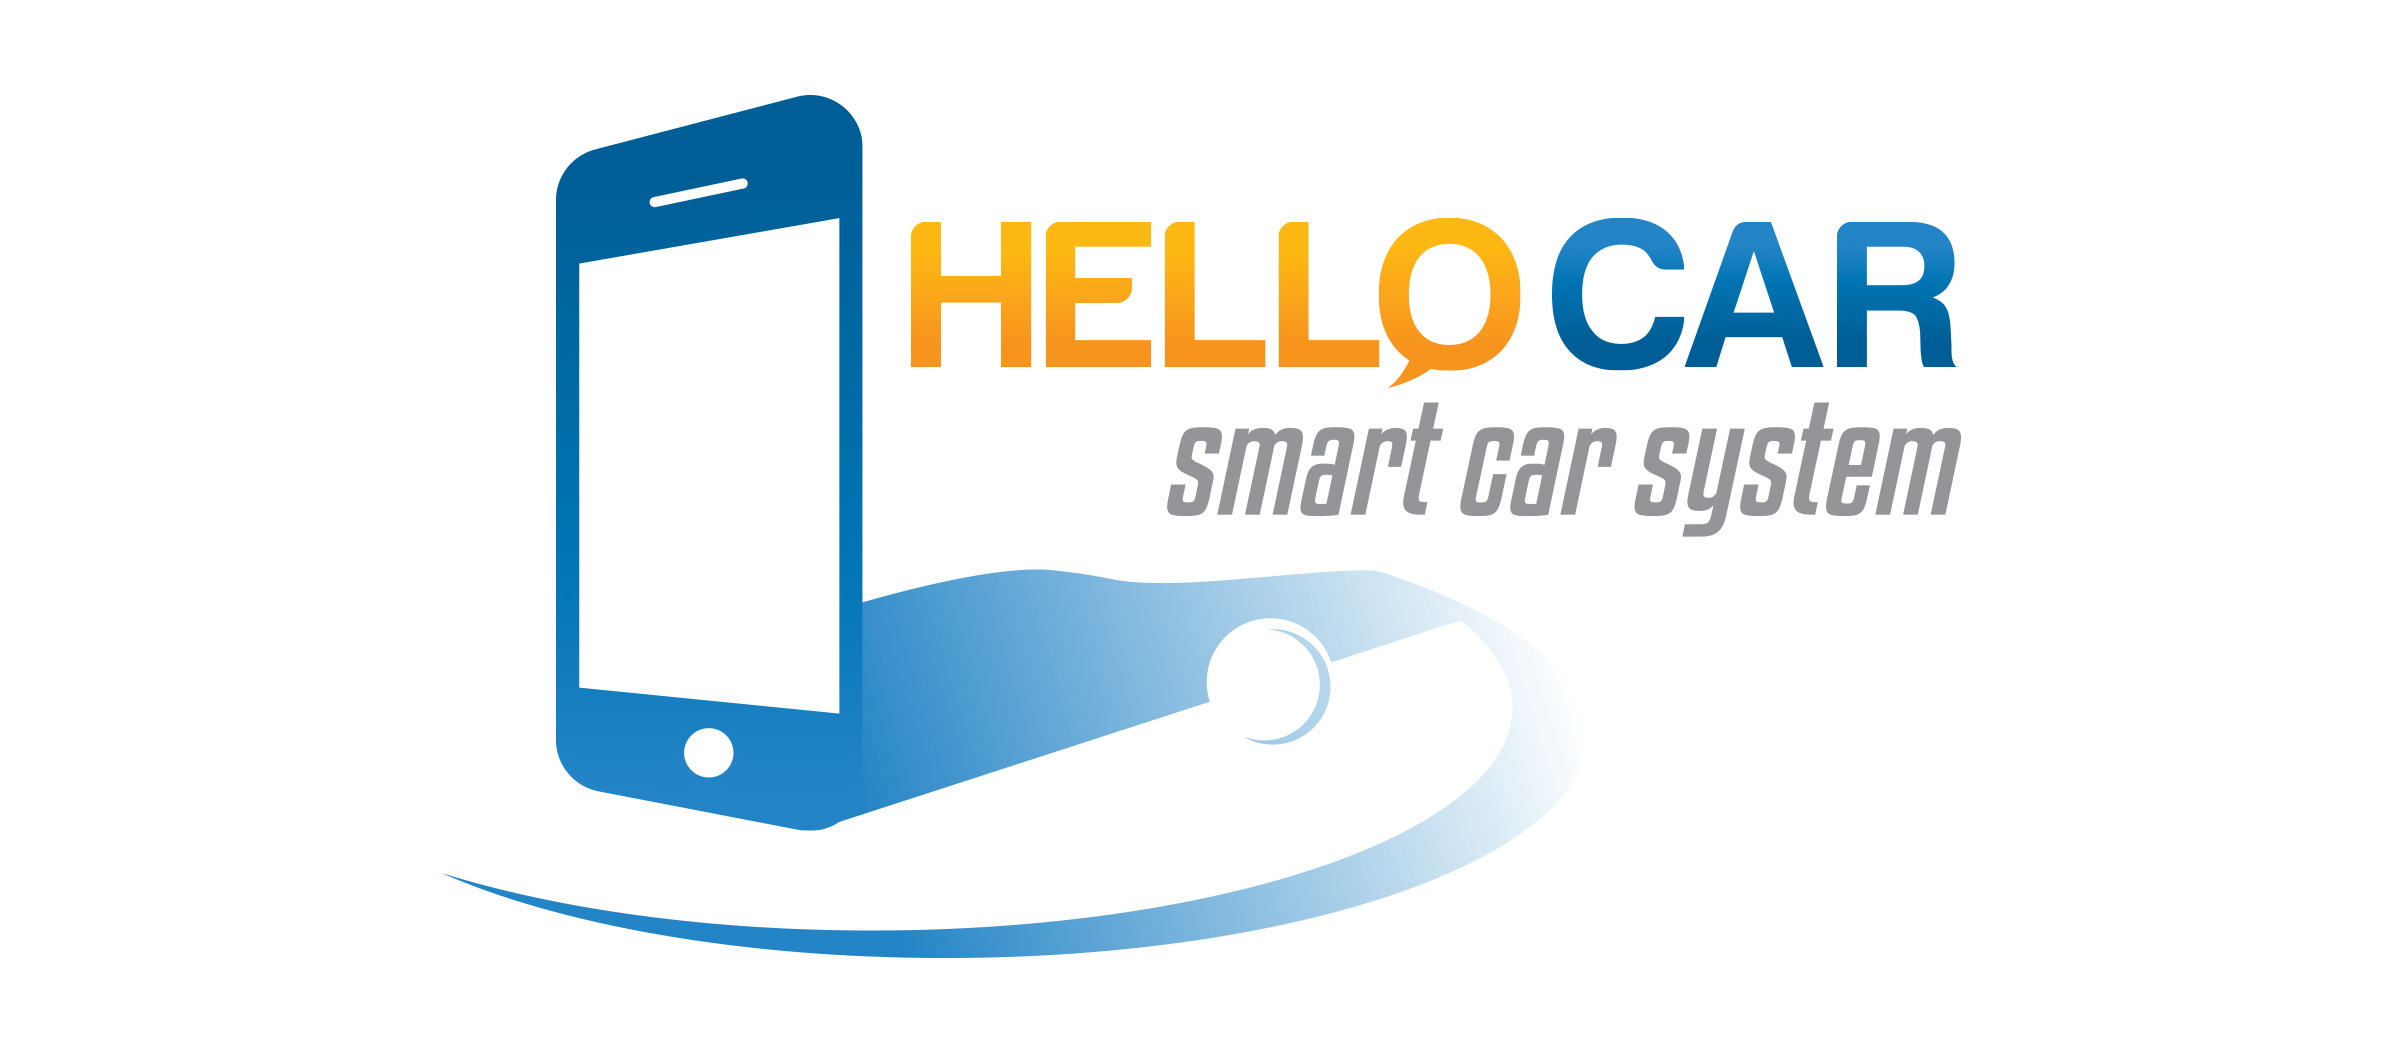 Hello Car is an electronic invention which enables a smart phone or tablet to turn into a sound system for a home and vehicle